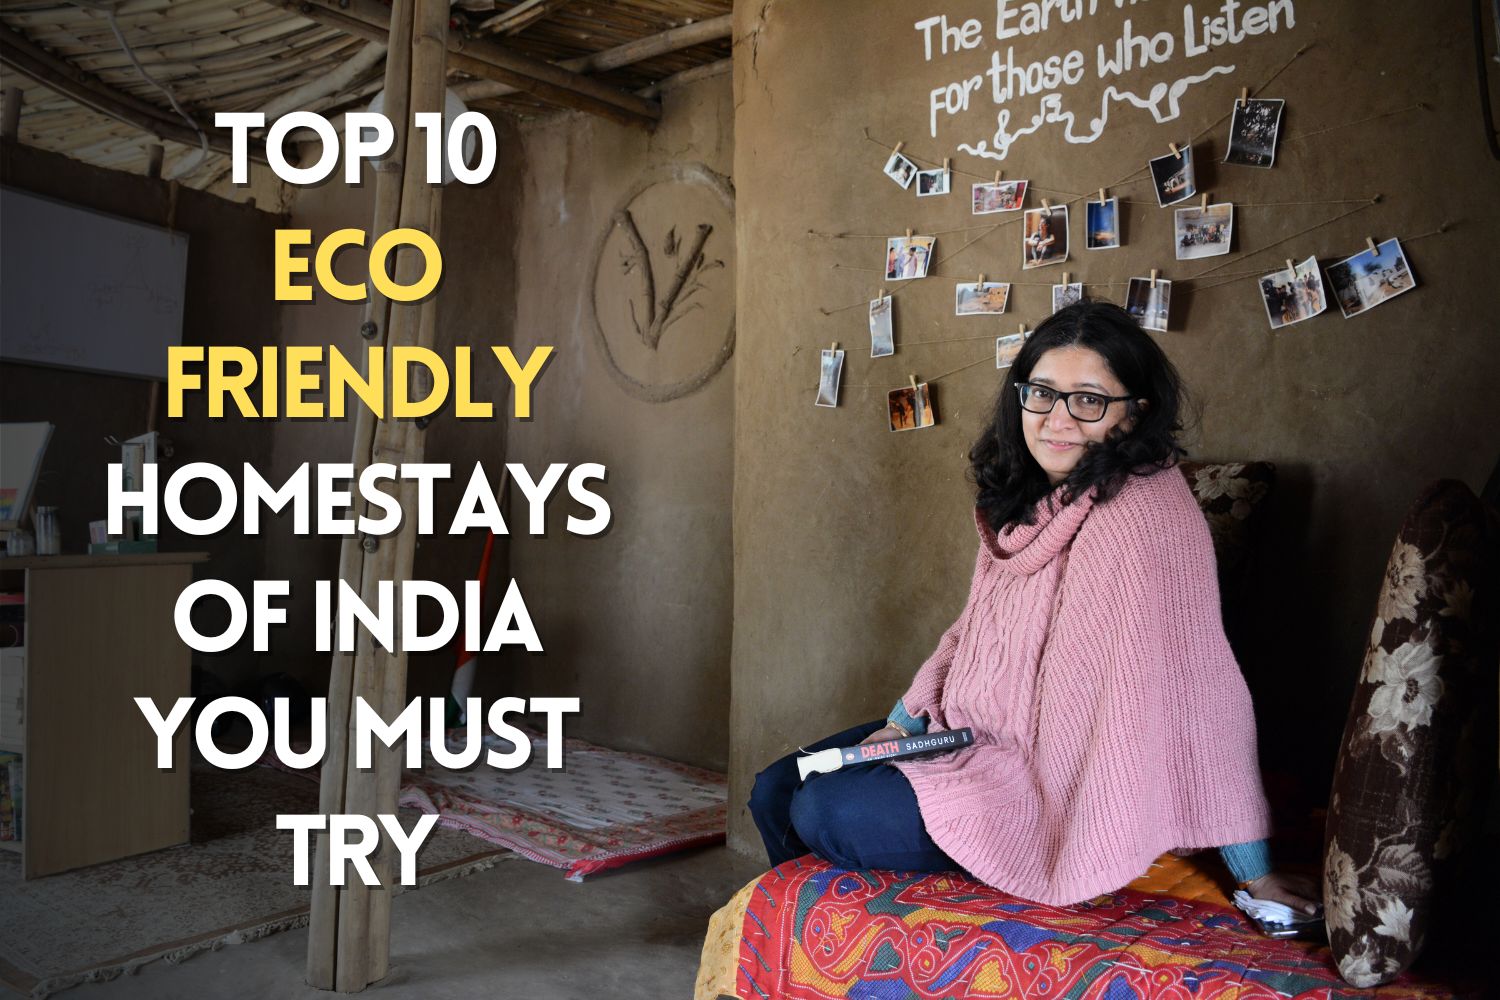 Top 10 Eco Friendly Homestays of India